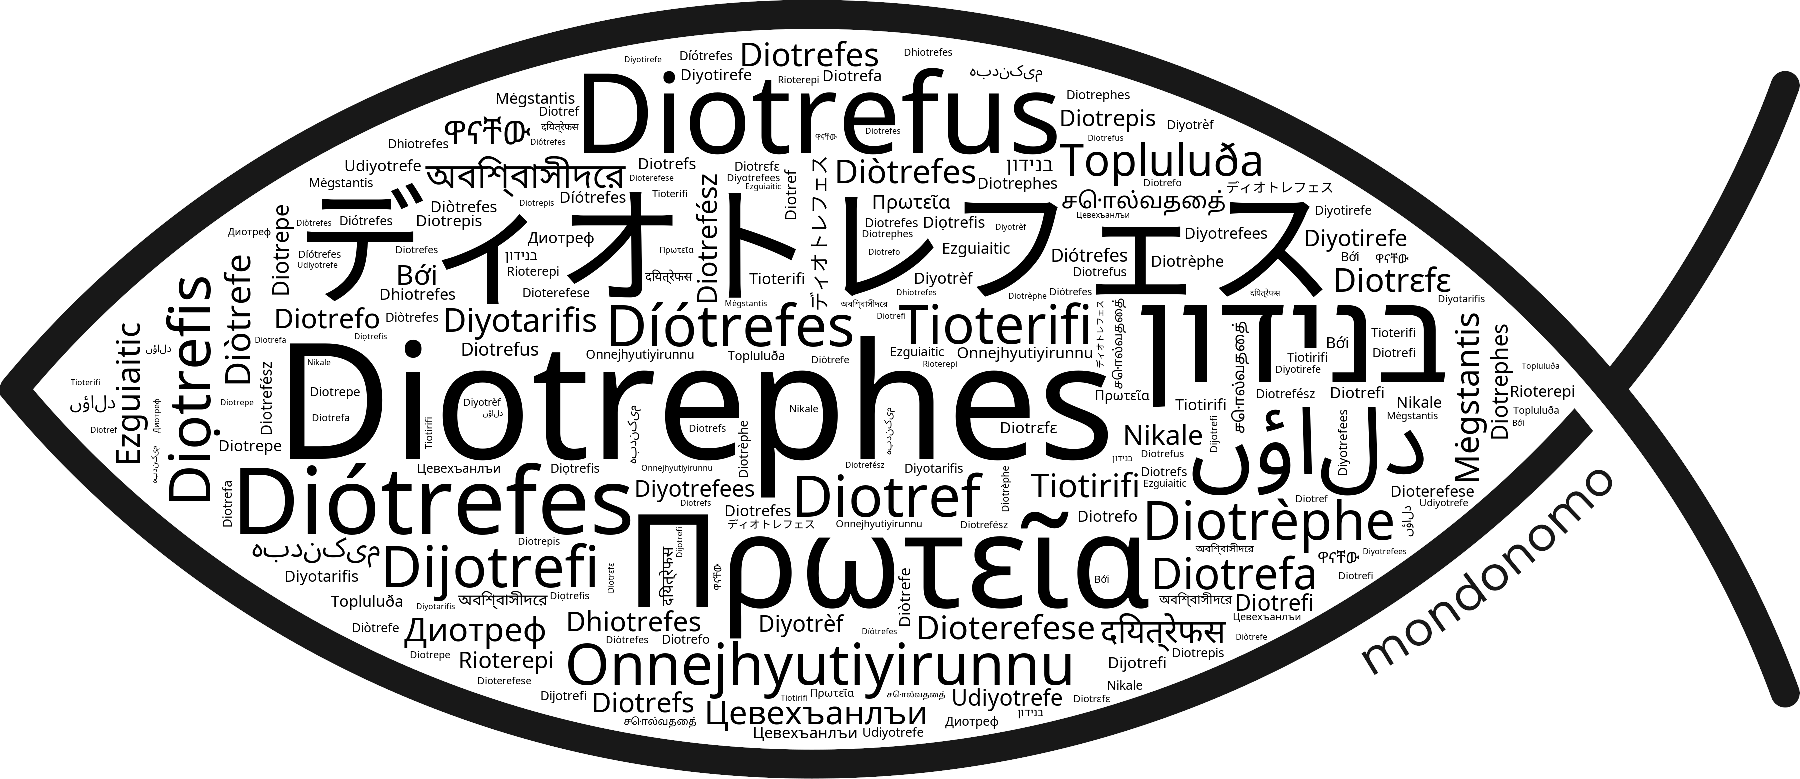 Name Diotrephes in the world's Bibles